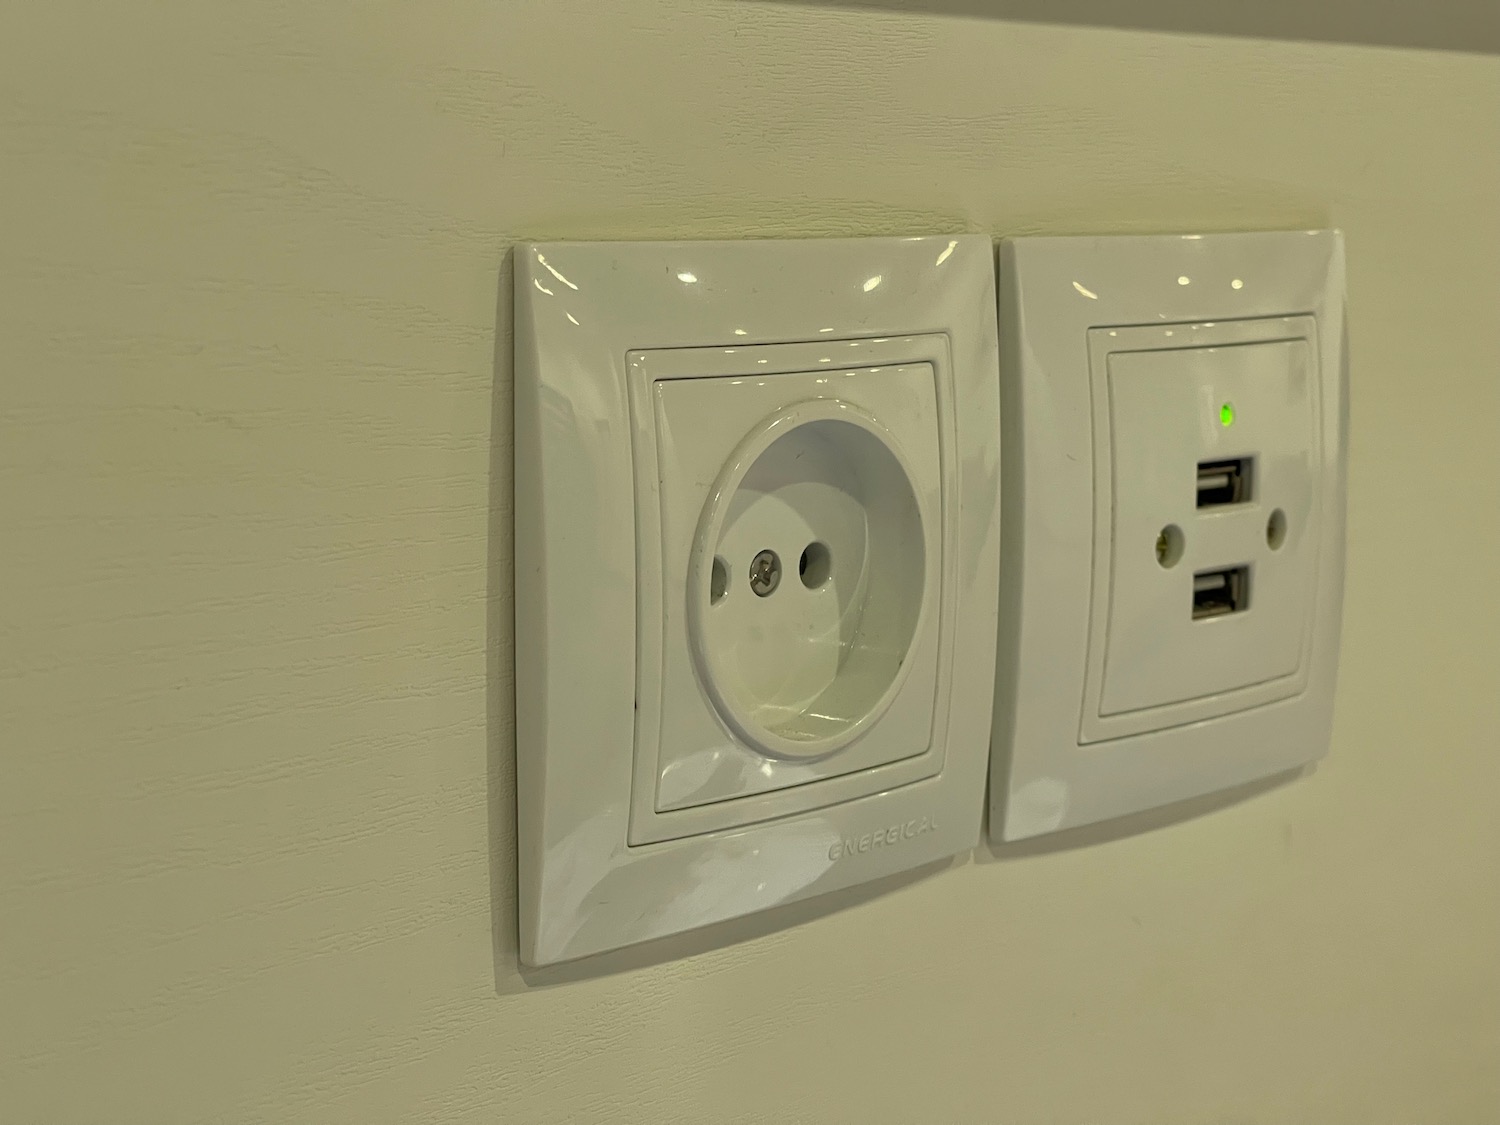 a white outlet with a green light on it